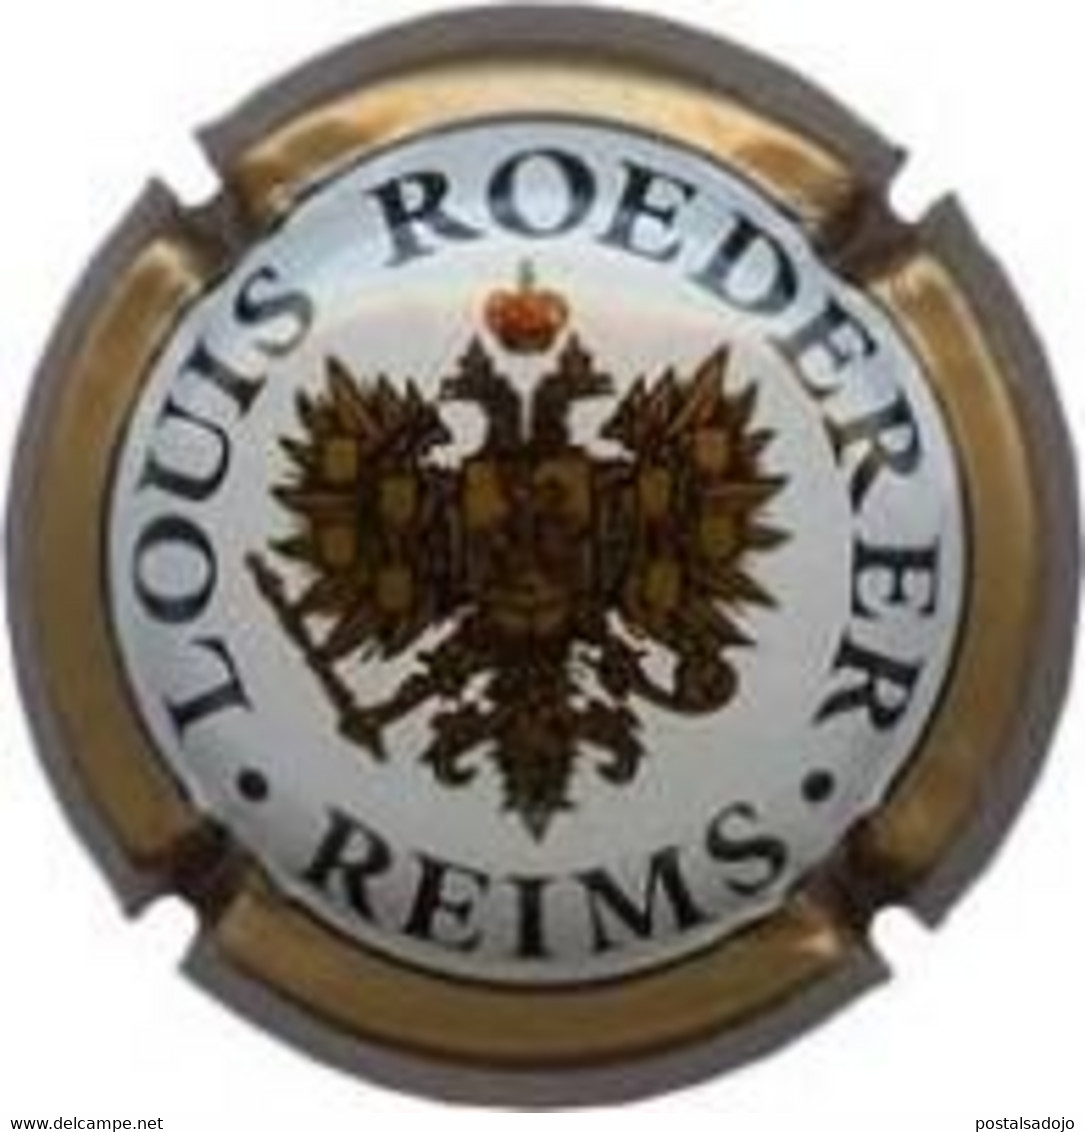 (14) PLACA. CAPSULE CHAMPAGNE ... LOUIS ROEDERER - Roederer, Louis